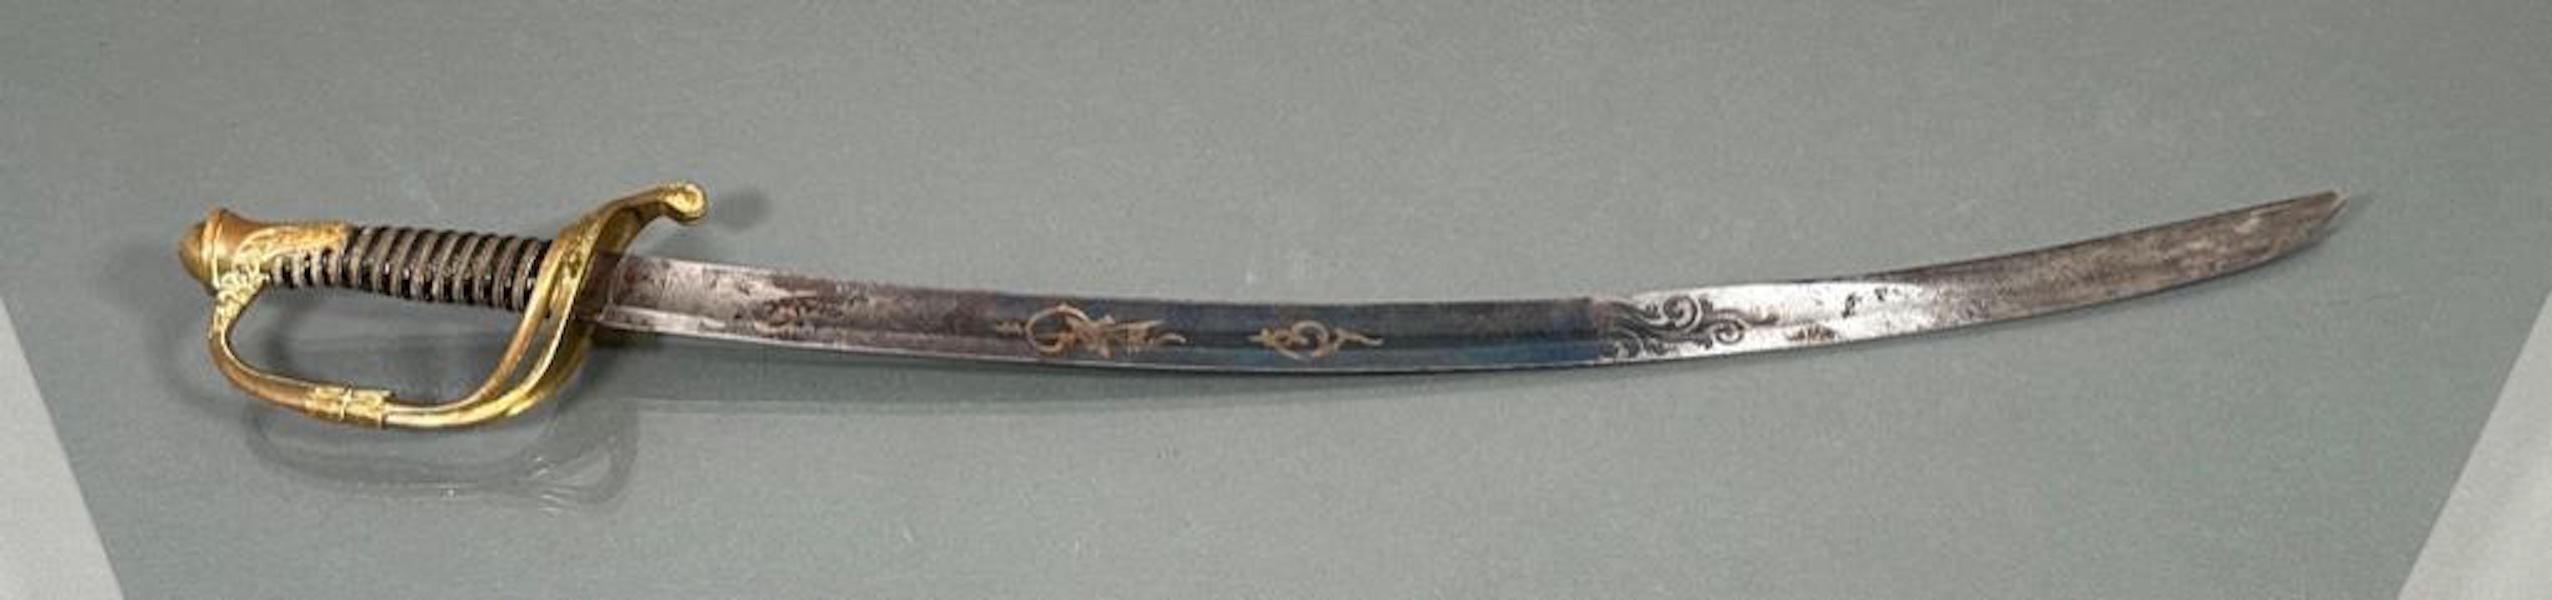 Circa-1840-1850 non-regulation Infantry officer’s sword by J.H. Lambert, estimated at $900-$1,200